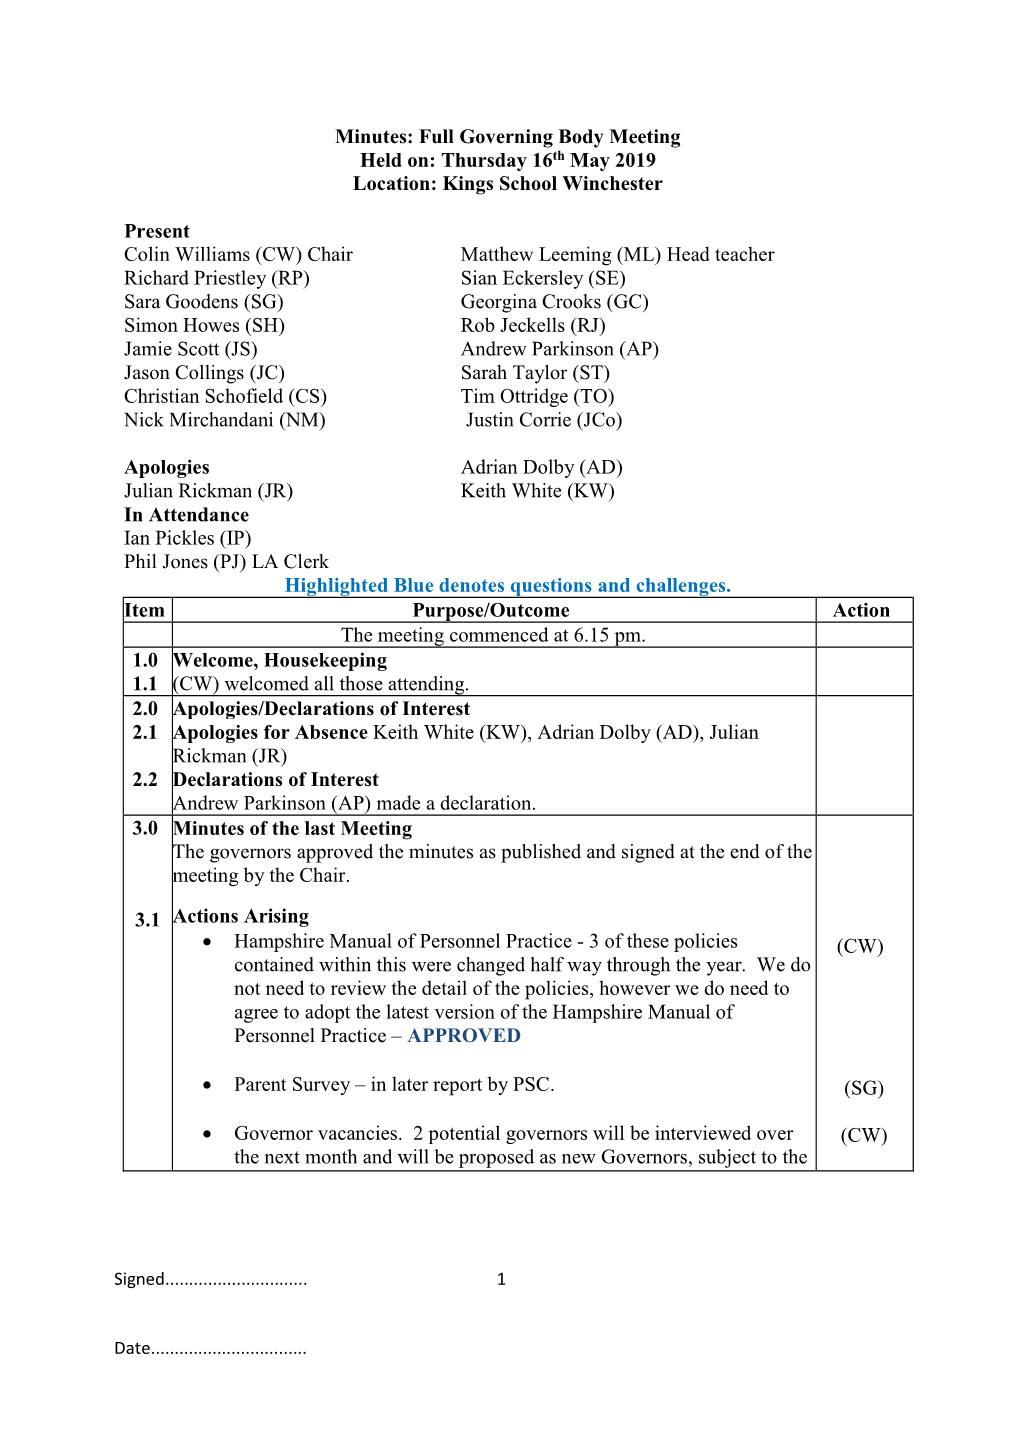 Minutes: Full Governing Body Meeting Held On: Thursday 16Th May 2019 Location: Kings School Winchester